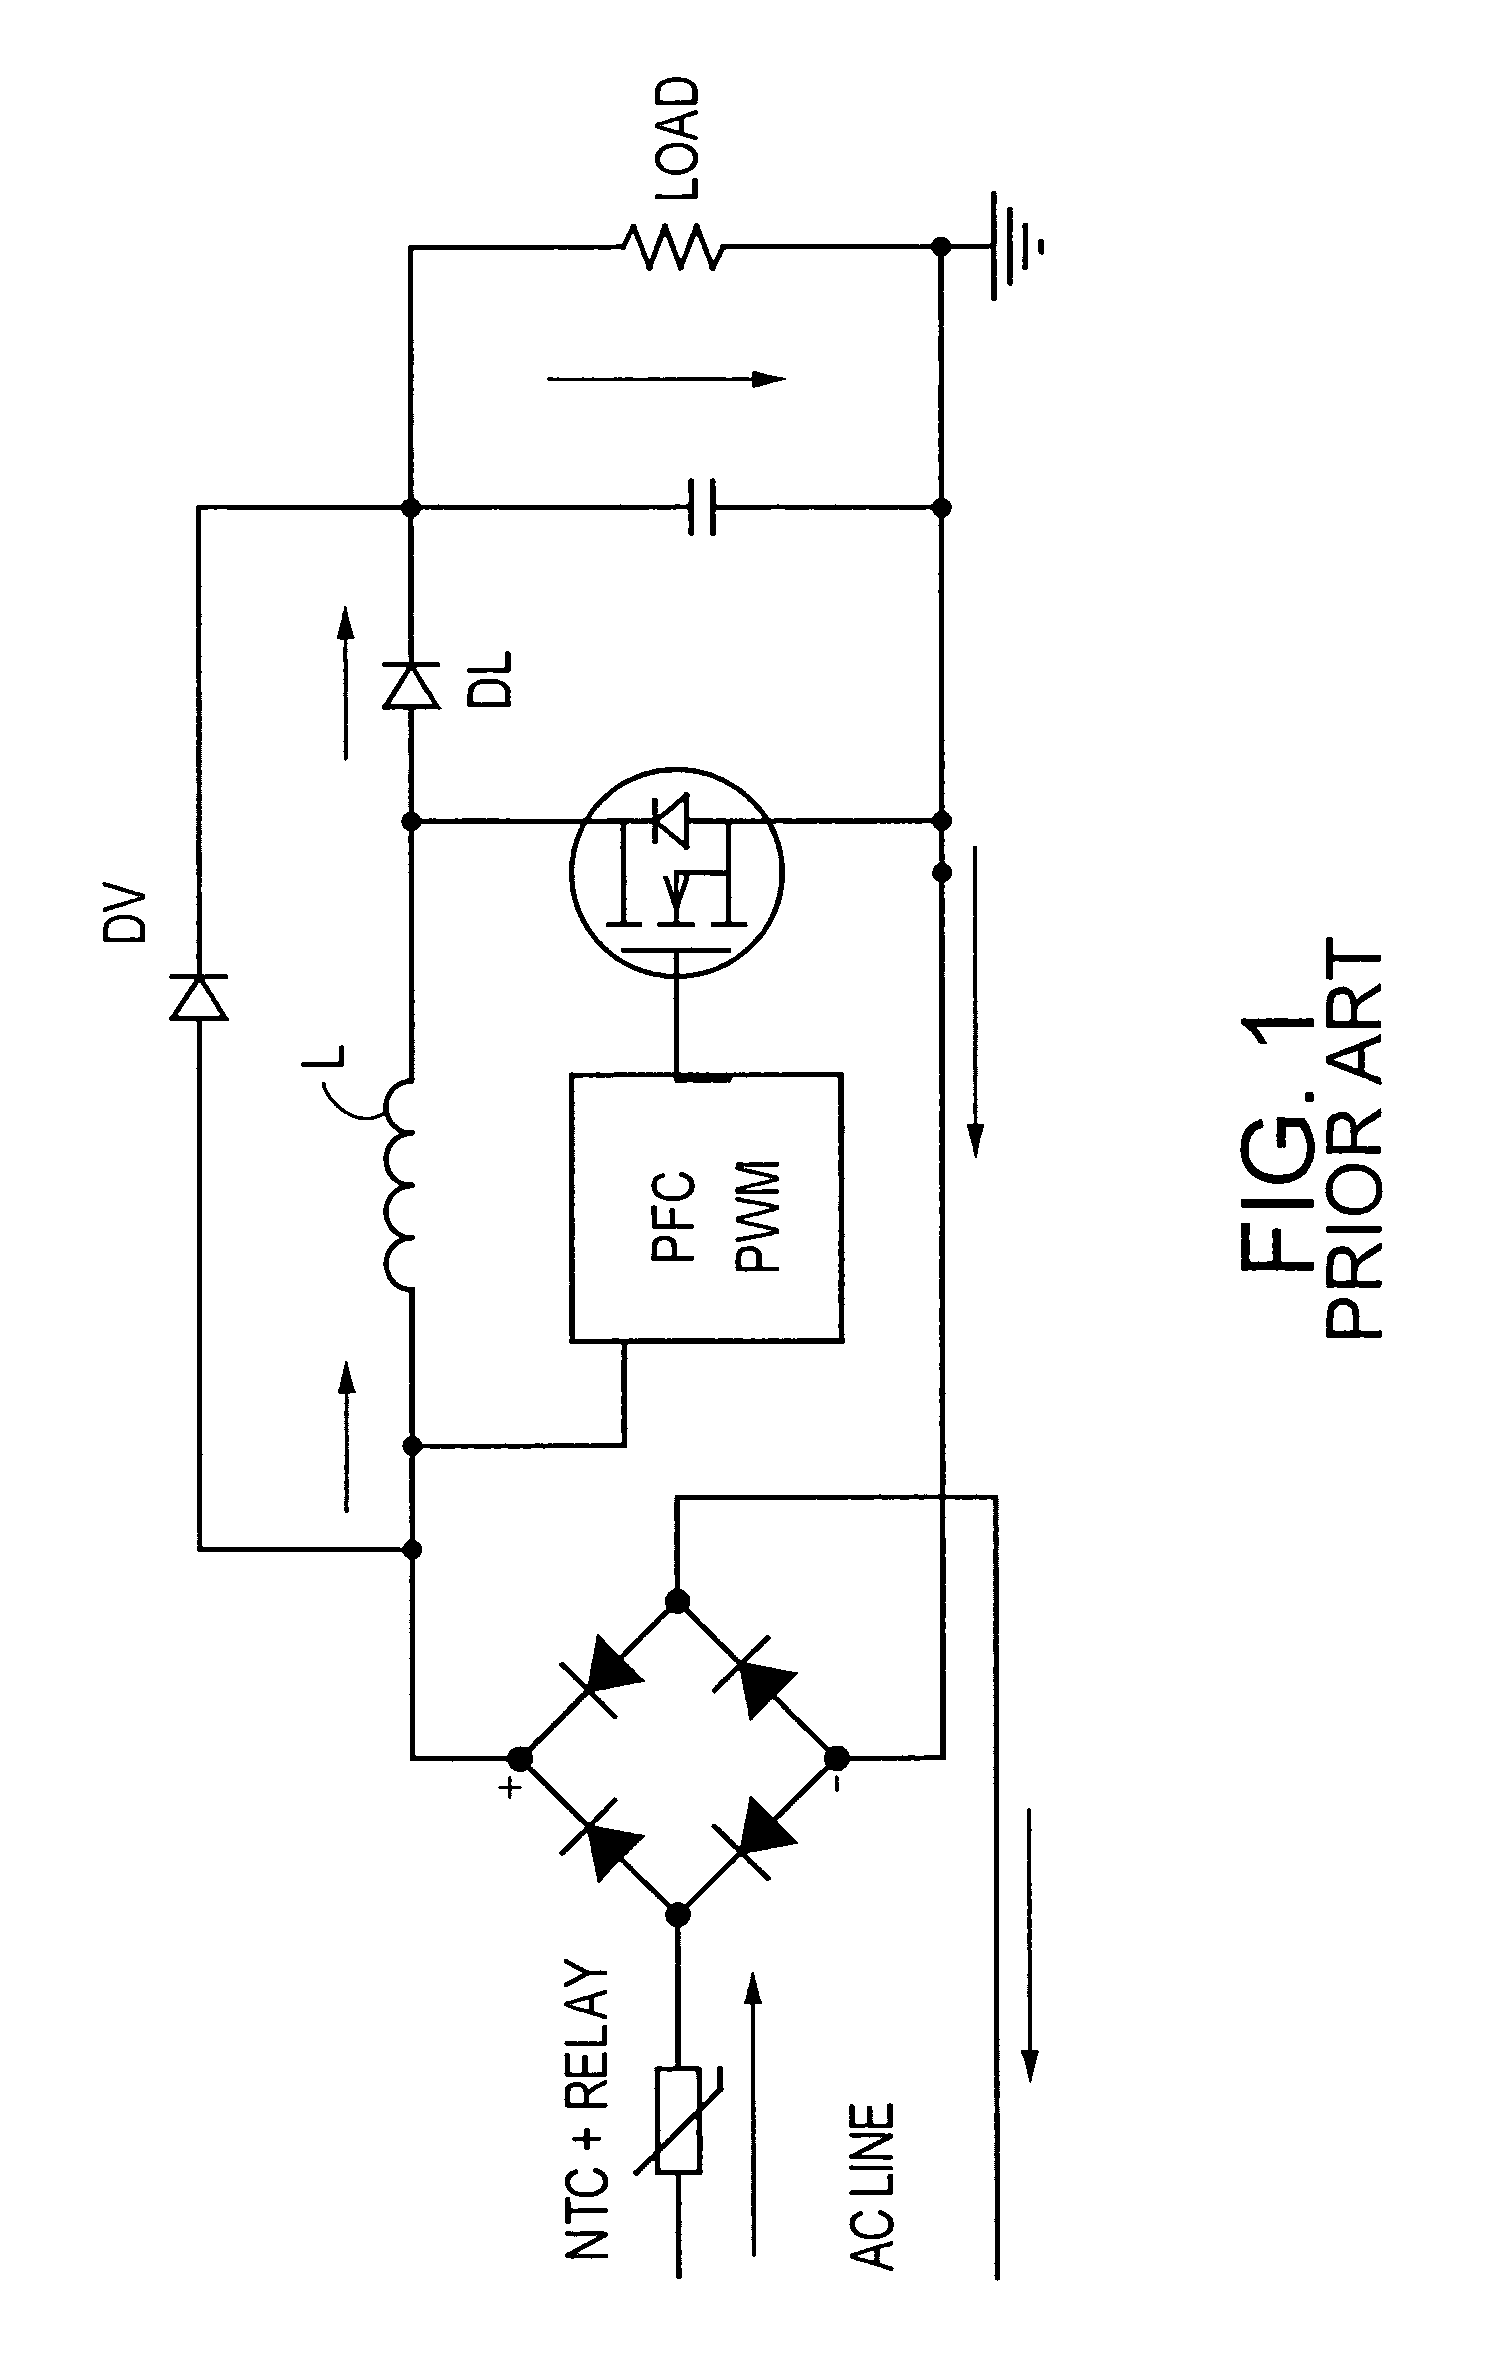 Bridge-less boost (BLB) power factor correction topology controlled with one cycle control